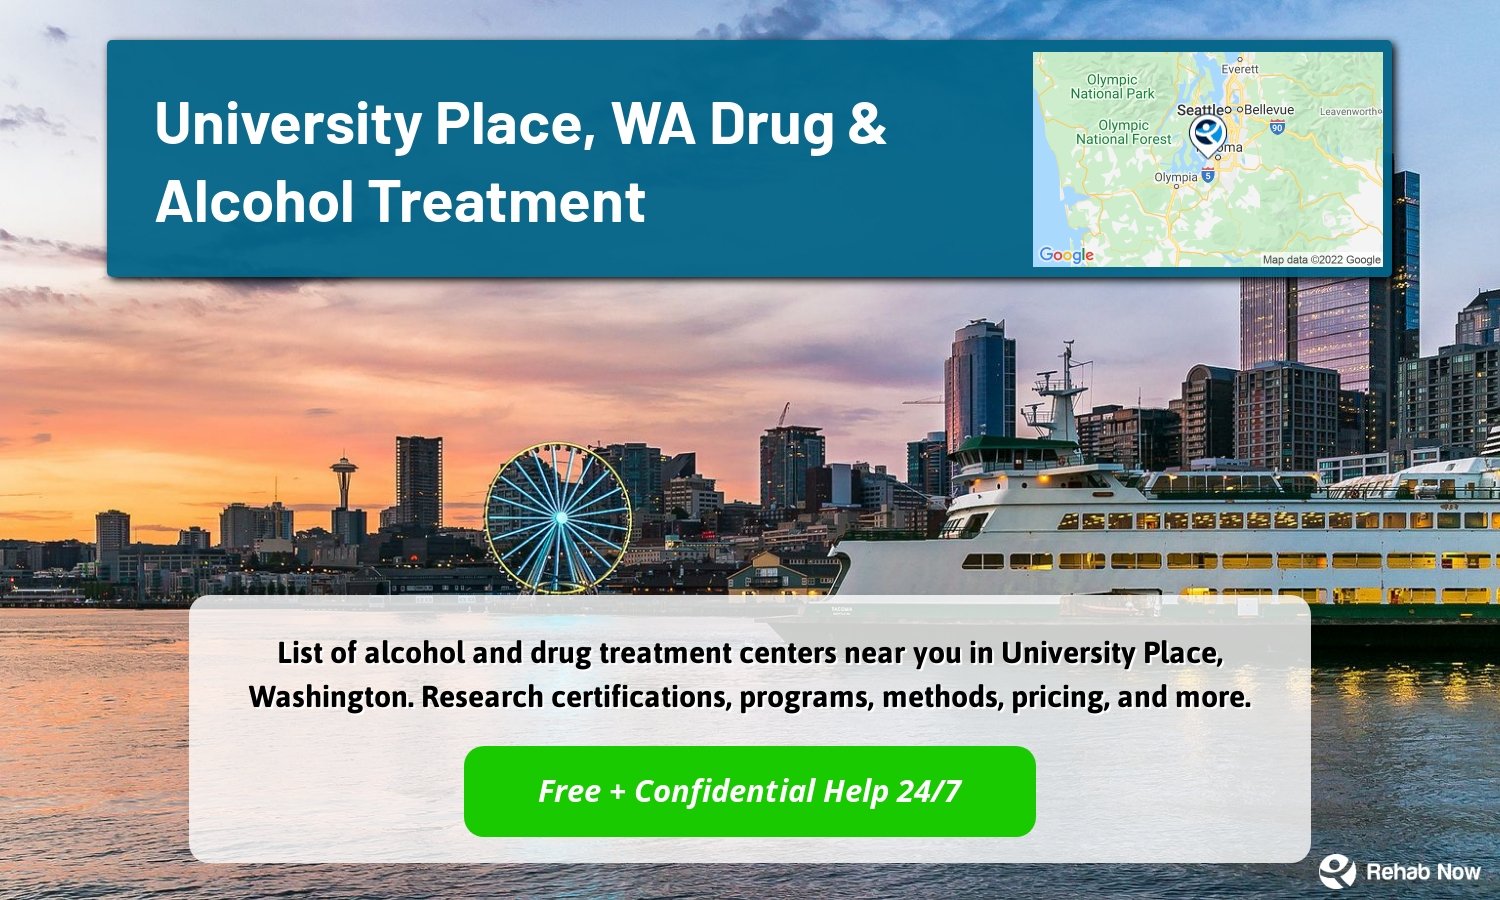 List of alcohol and drug treatment centers near you in University Place, Washington. Research certifications, programs, methods, pricing, and more.